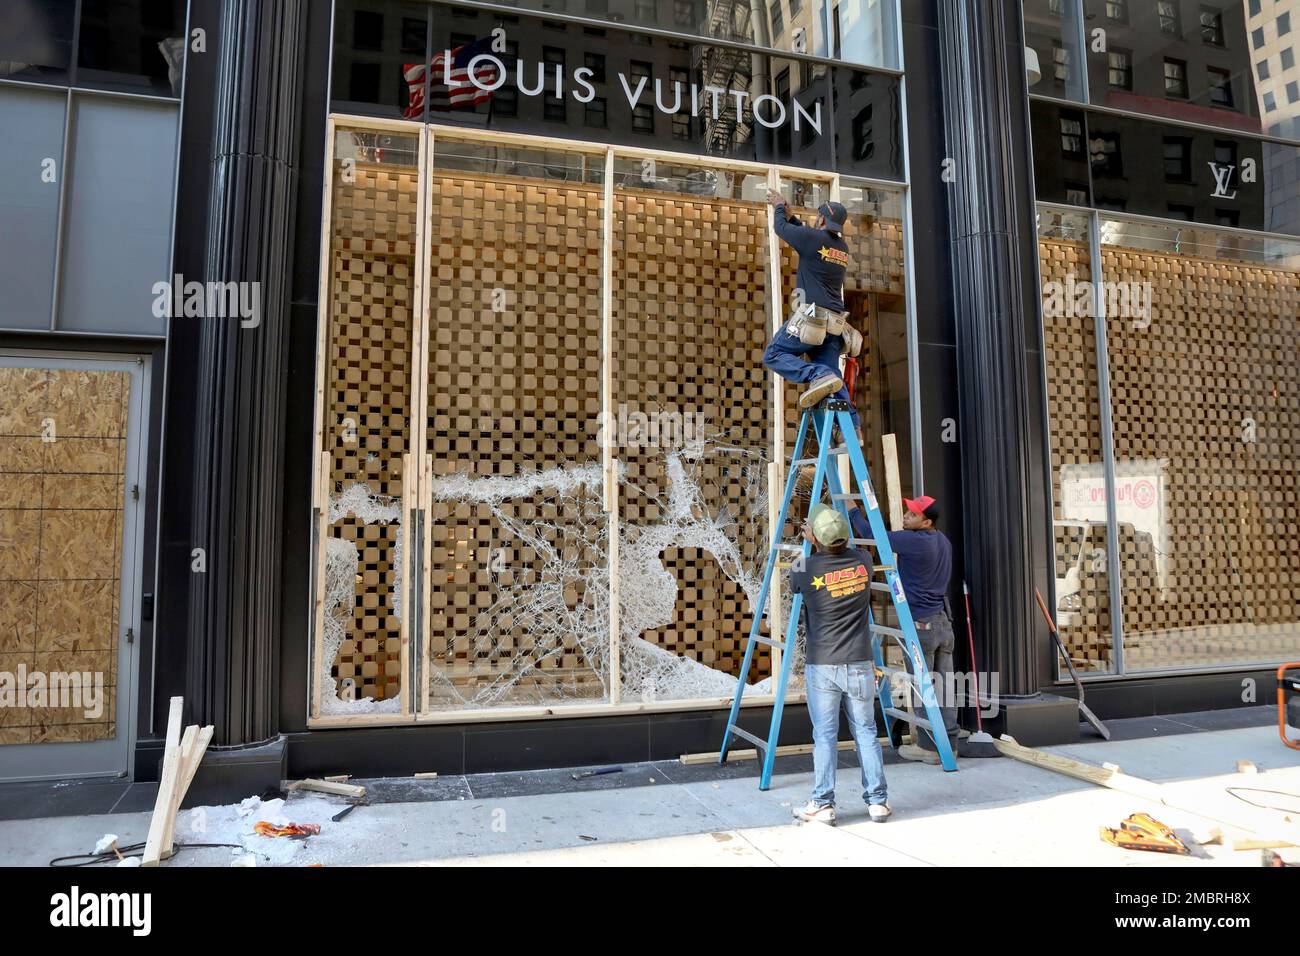 Is There A Louis Vuitton Store In Chicago Il 60611